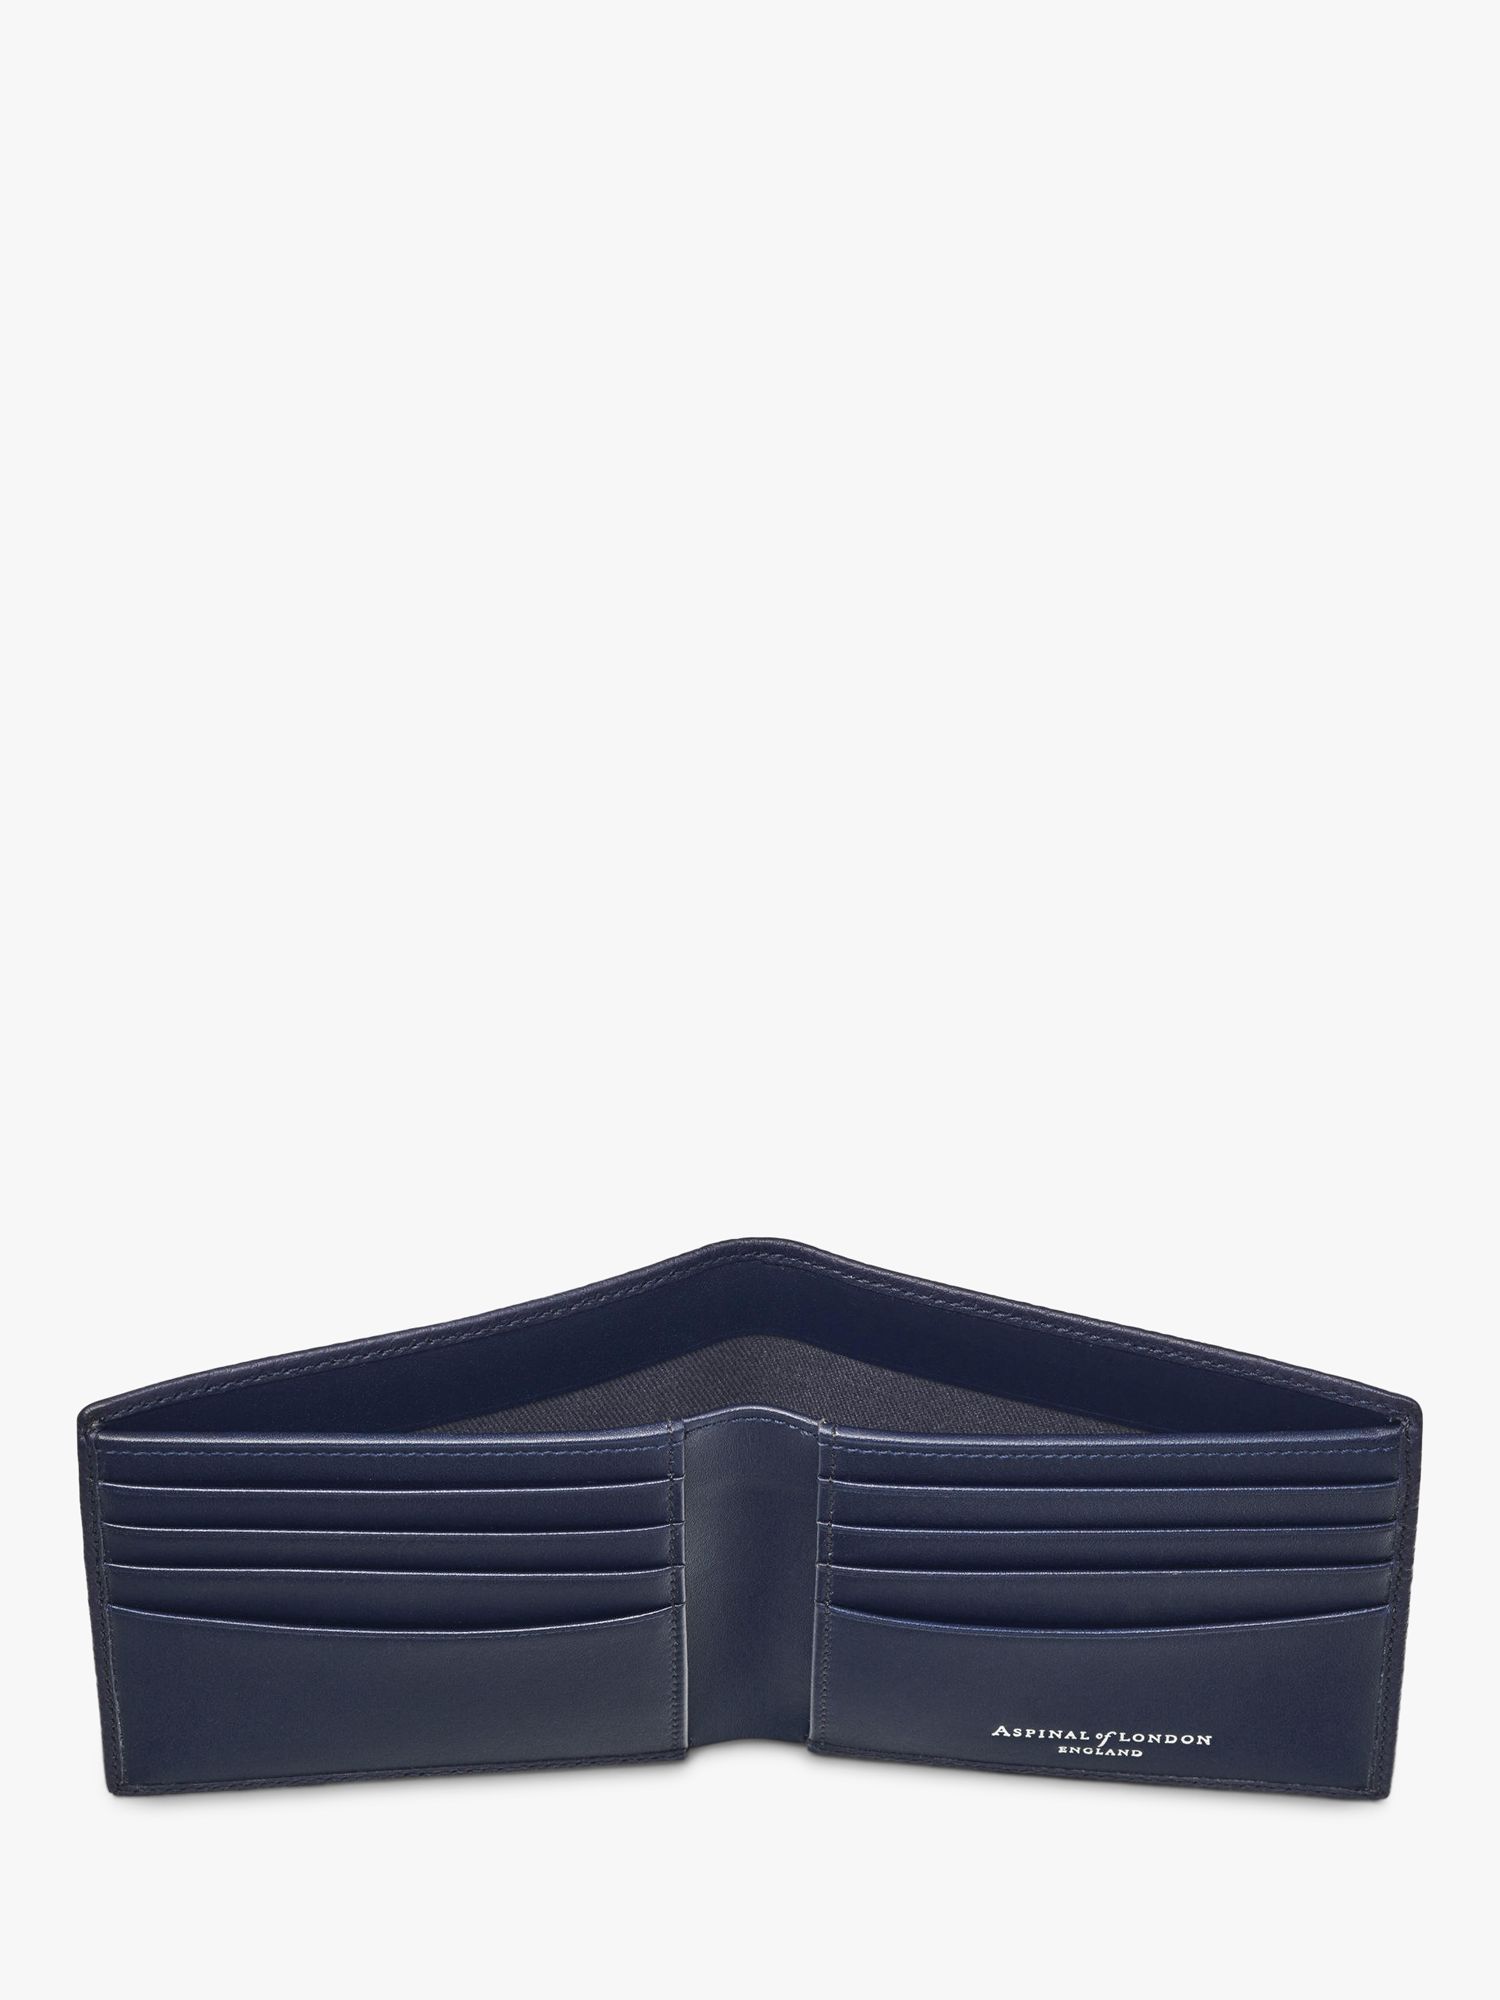 Aspinal of London 8 Card Billfold Pebble Leather Billfold Wallet, Navy